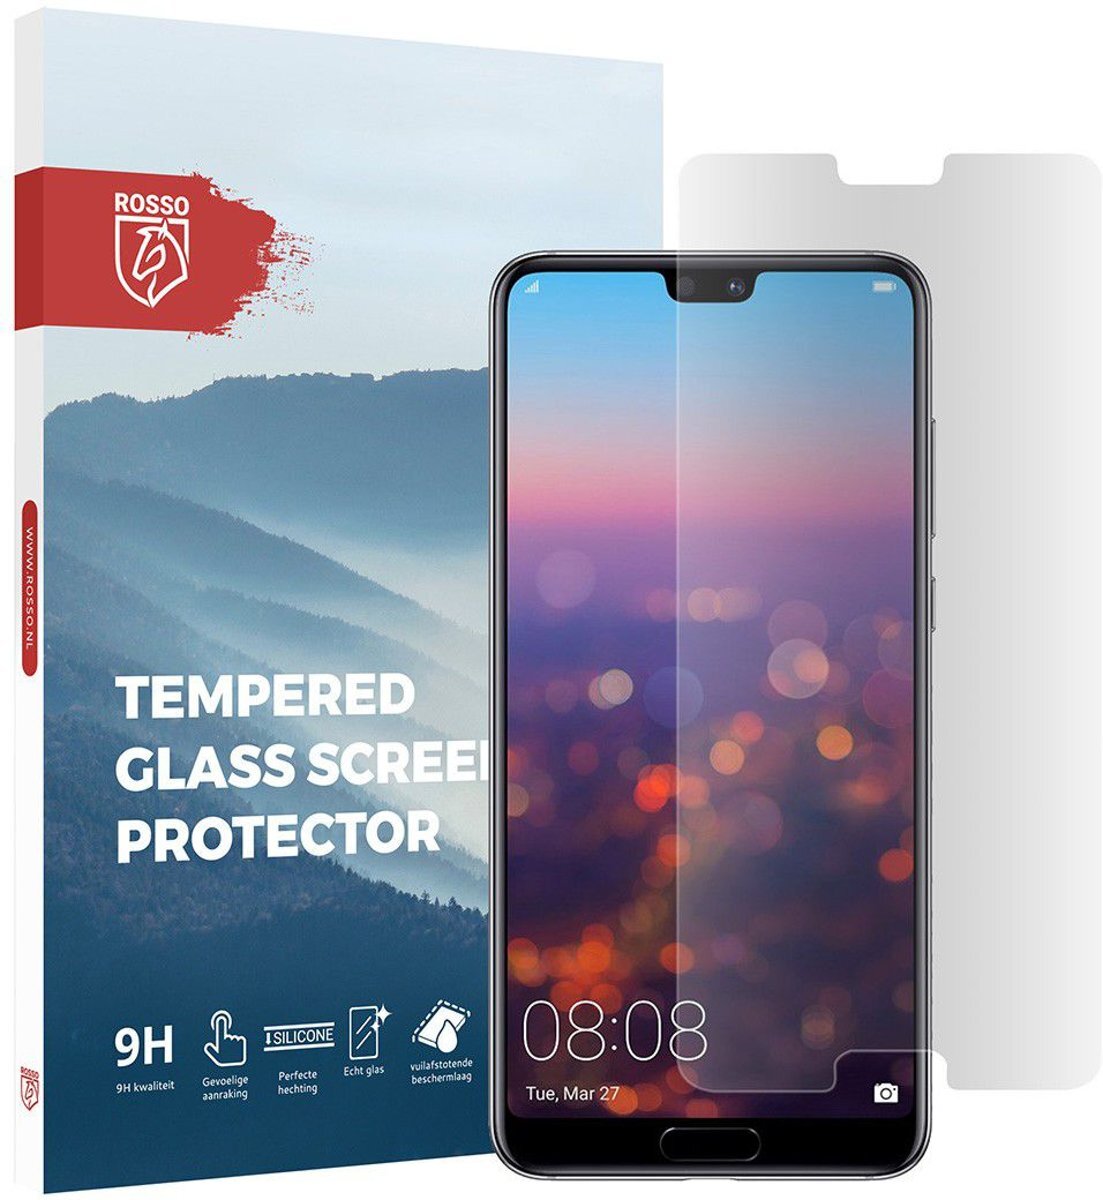 Rosso Huawei P20 Pro 9H Tempered Glass Screen Protector